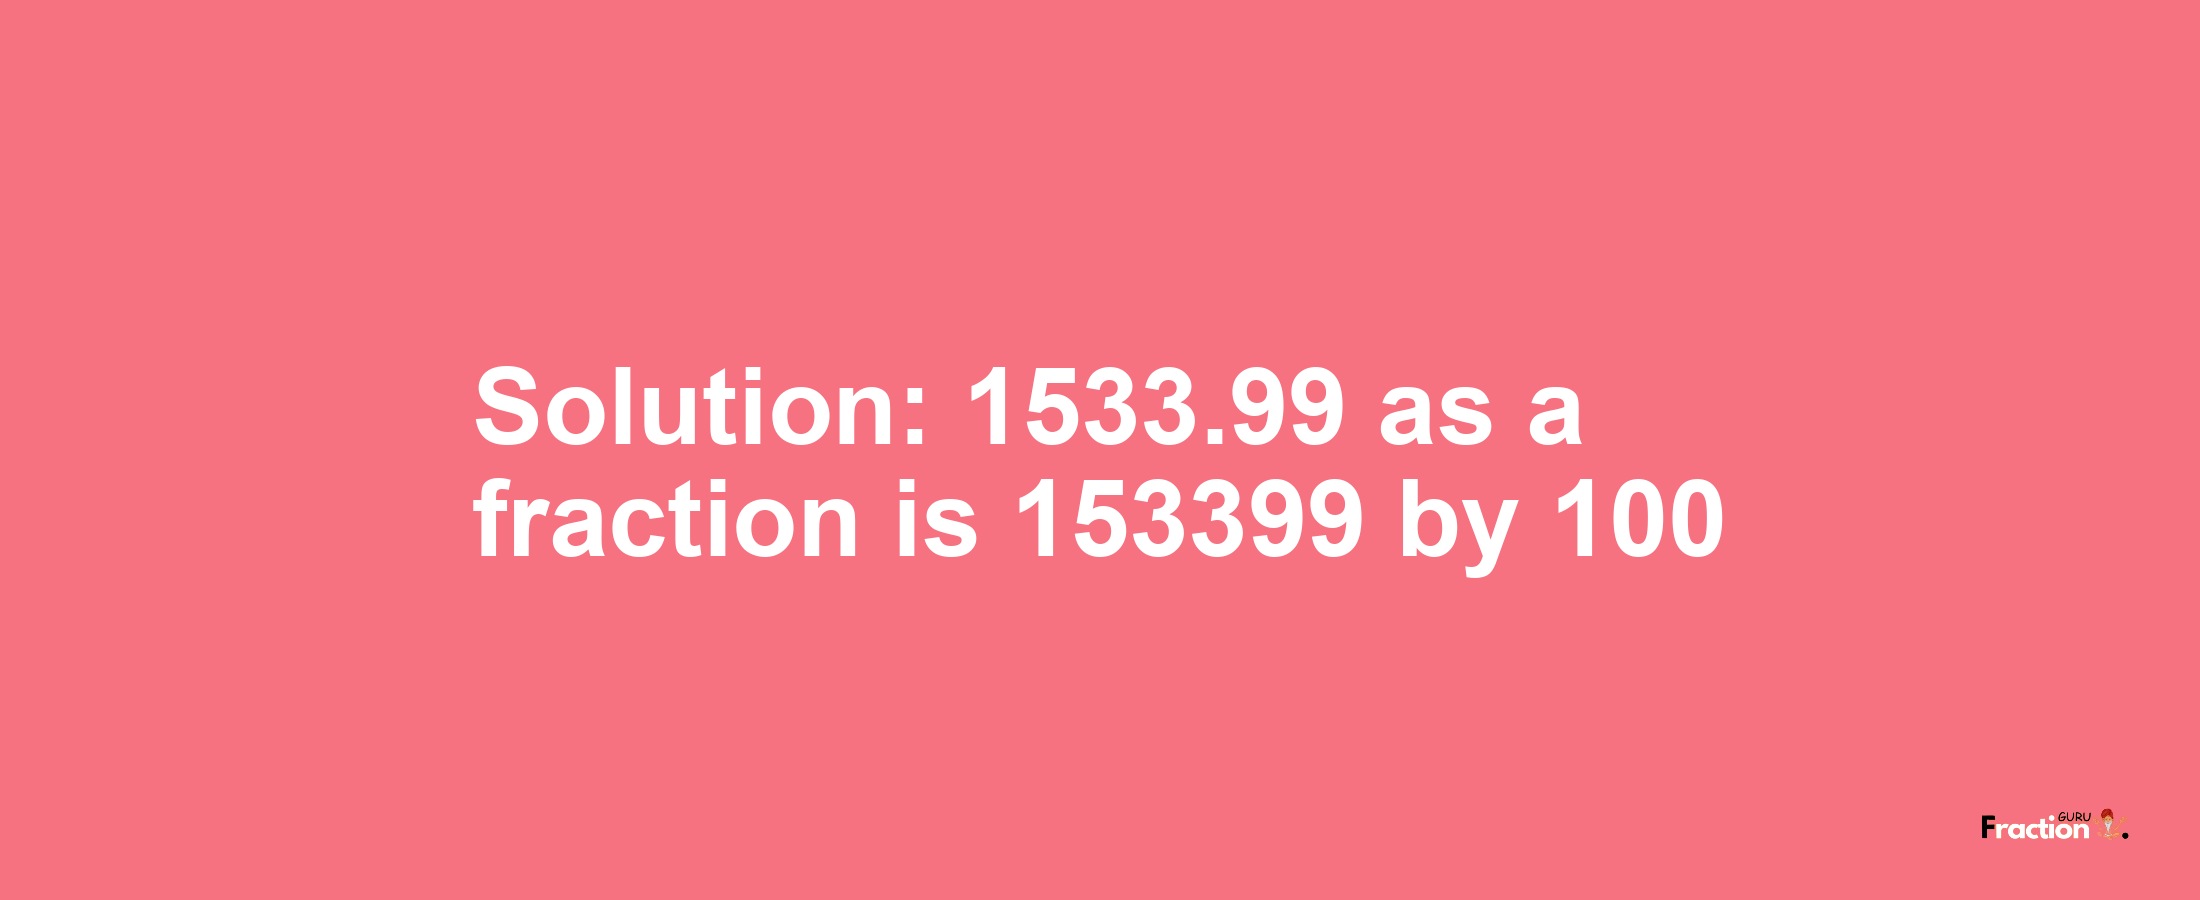 Solution:1533.99 as a fraction is 153399/100